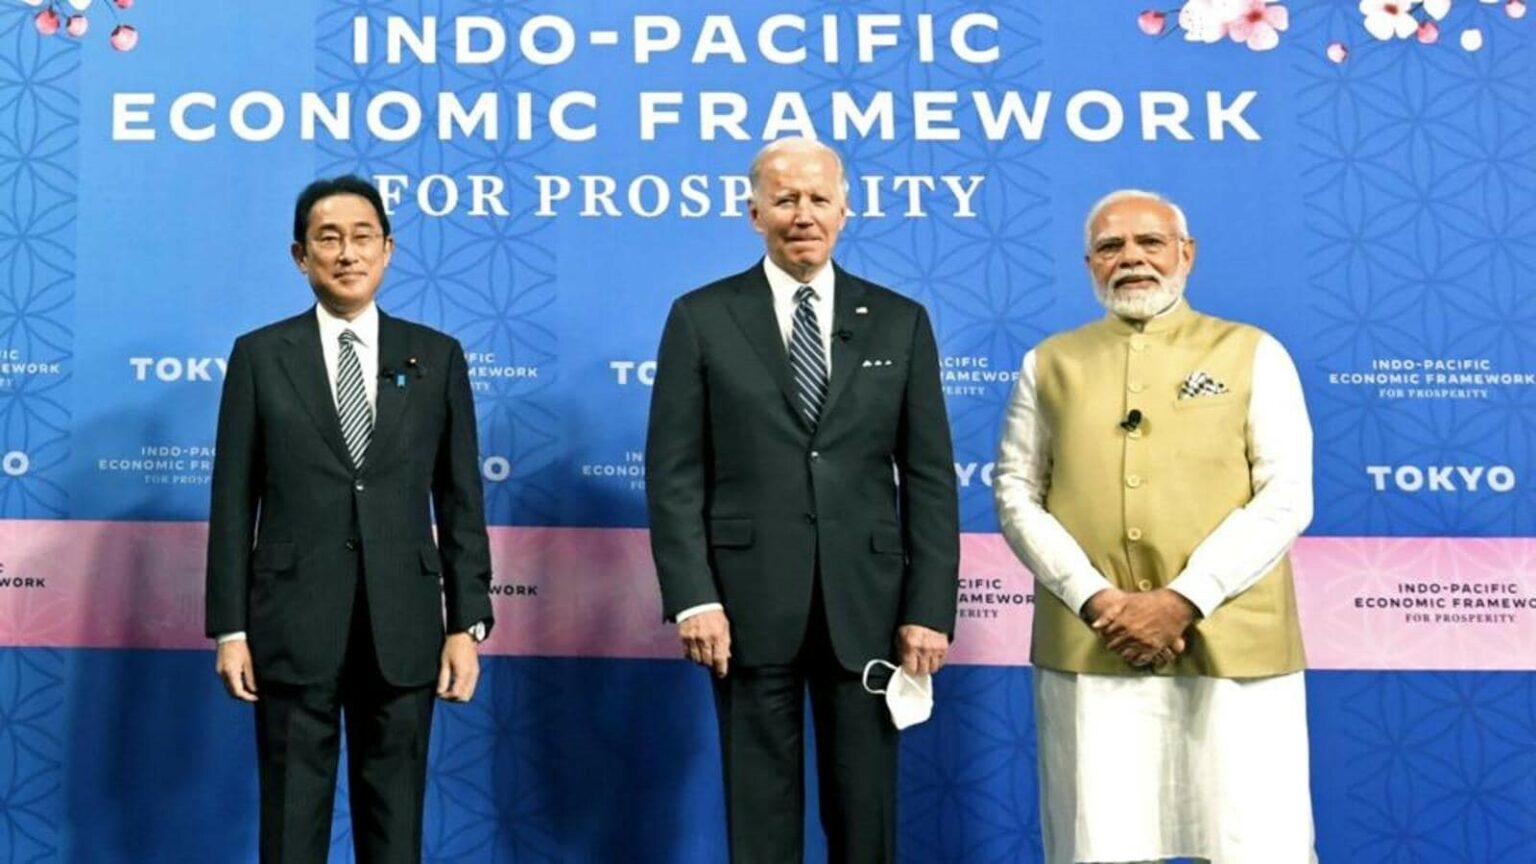 Indo-Pacific economic framework and how is India linked up?